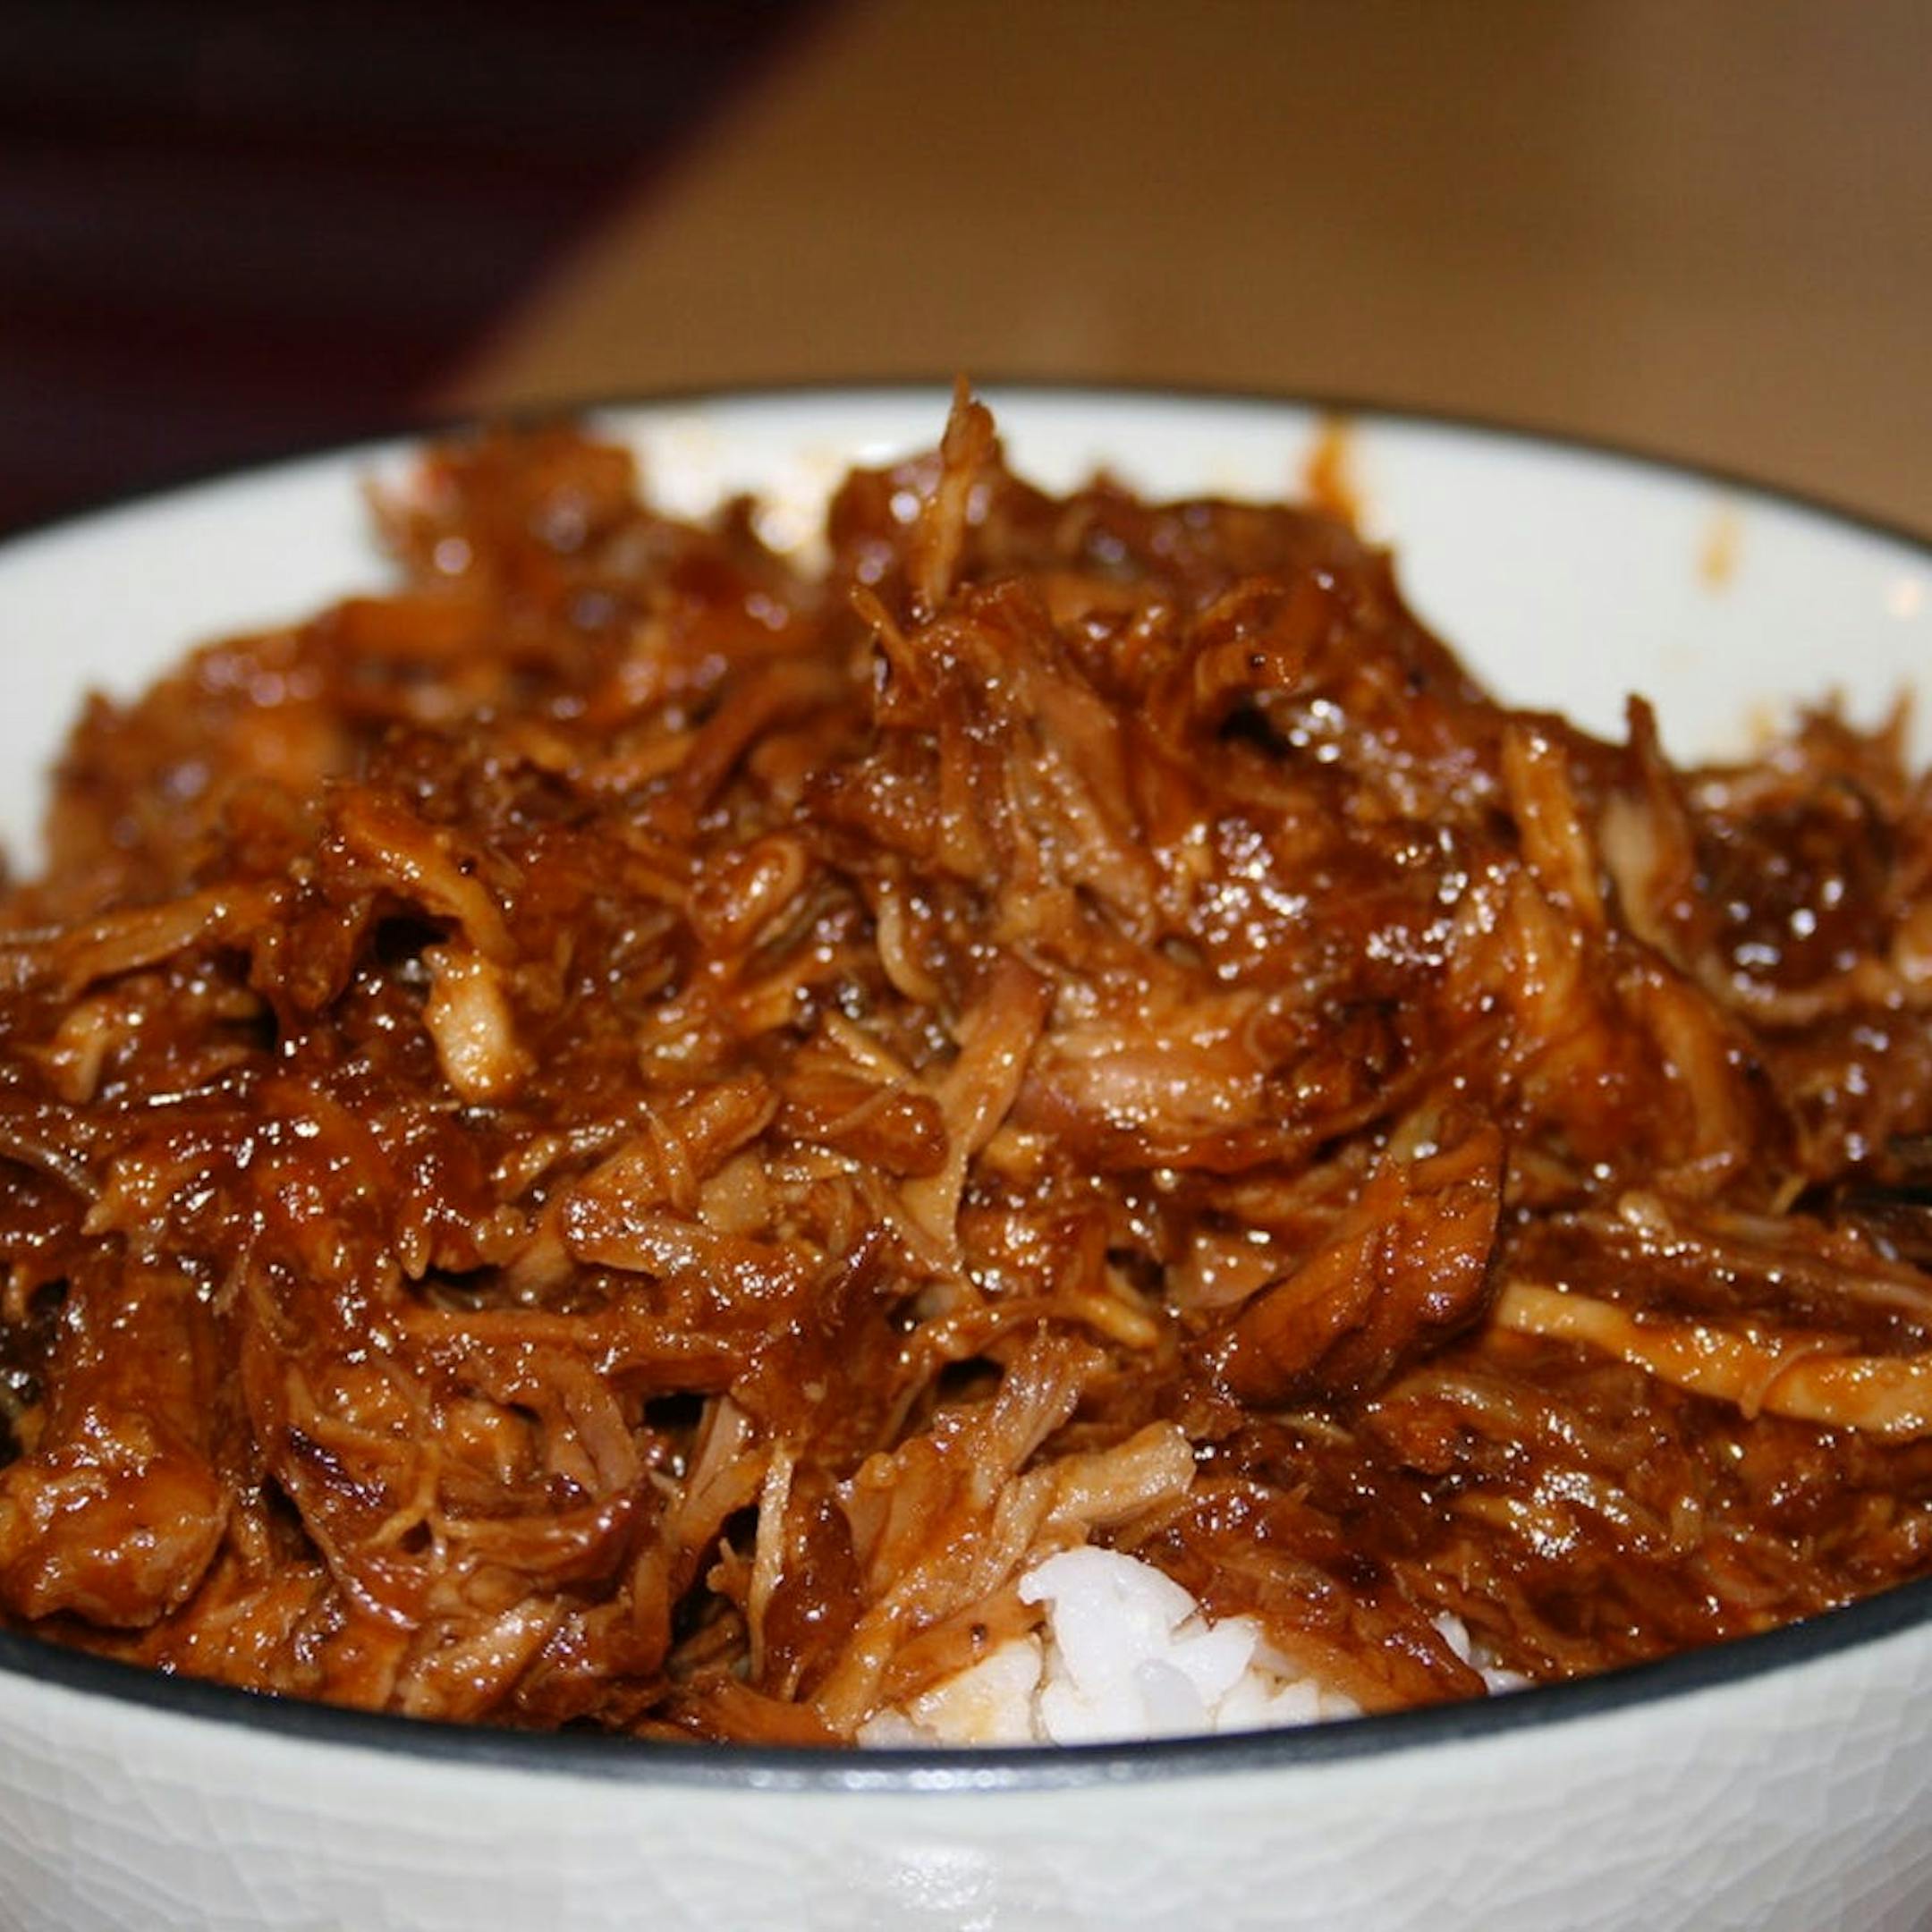 Beer-Braised Barbecue Pork Butt